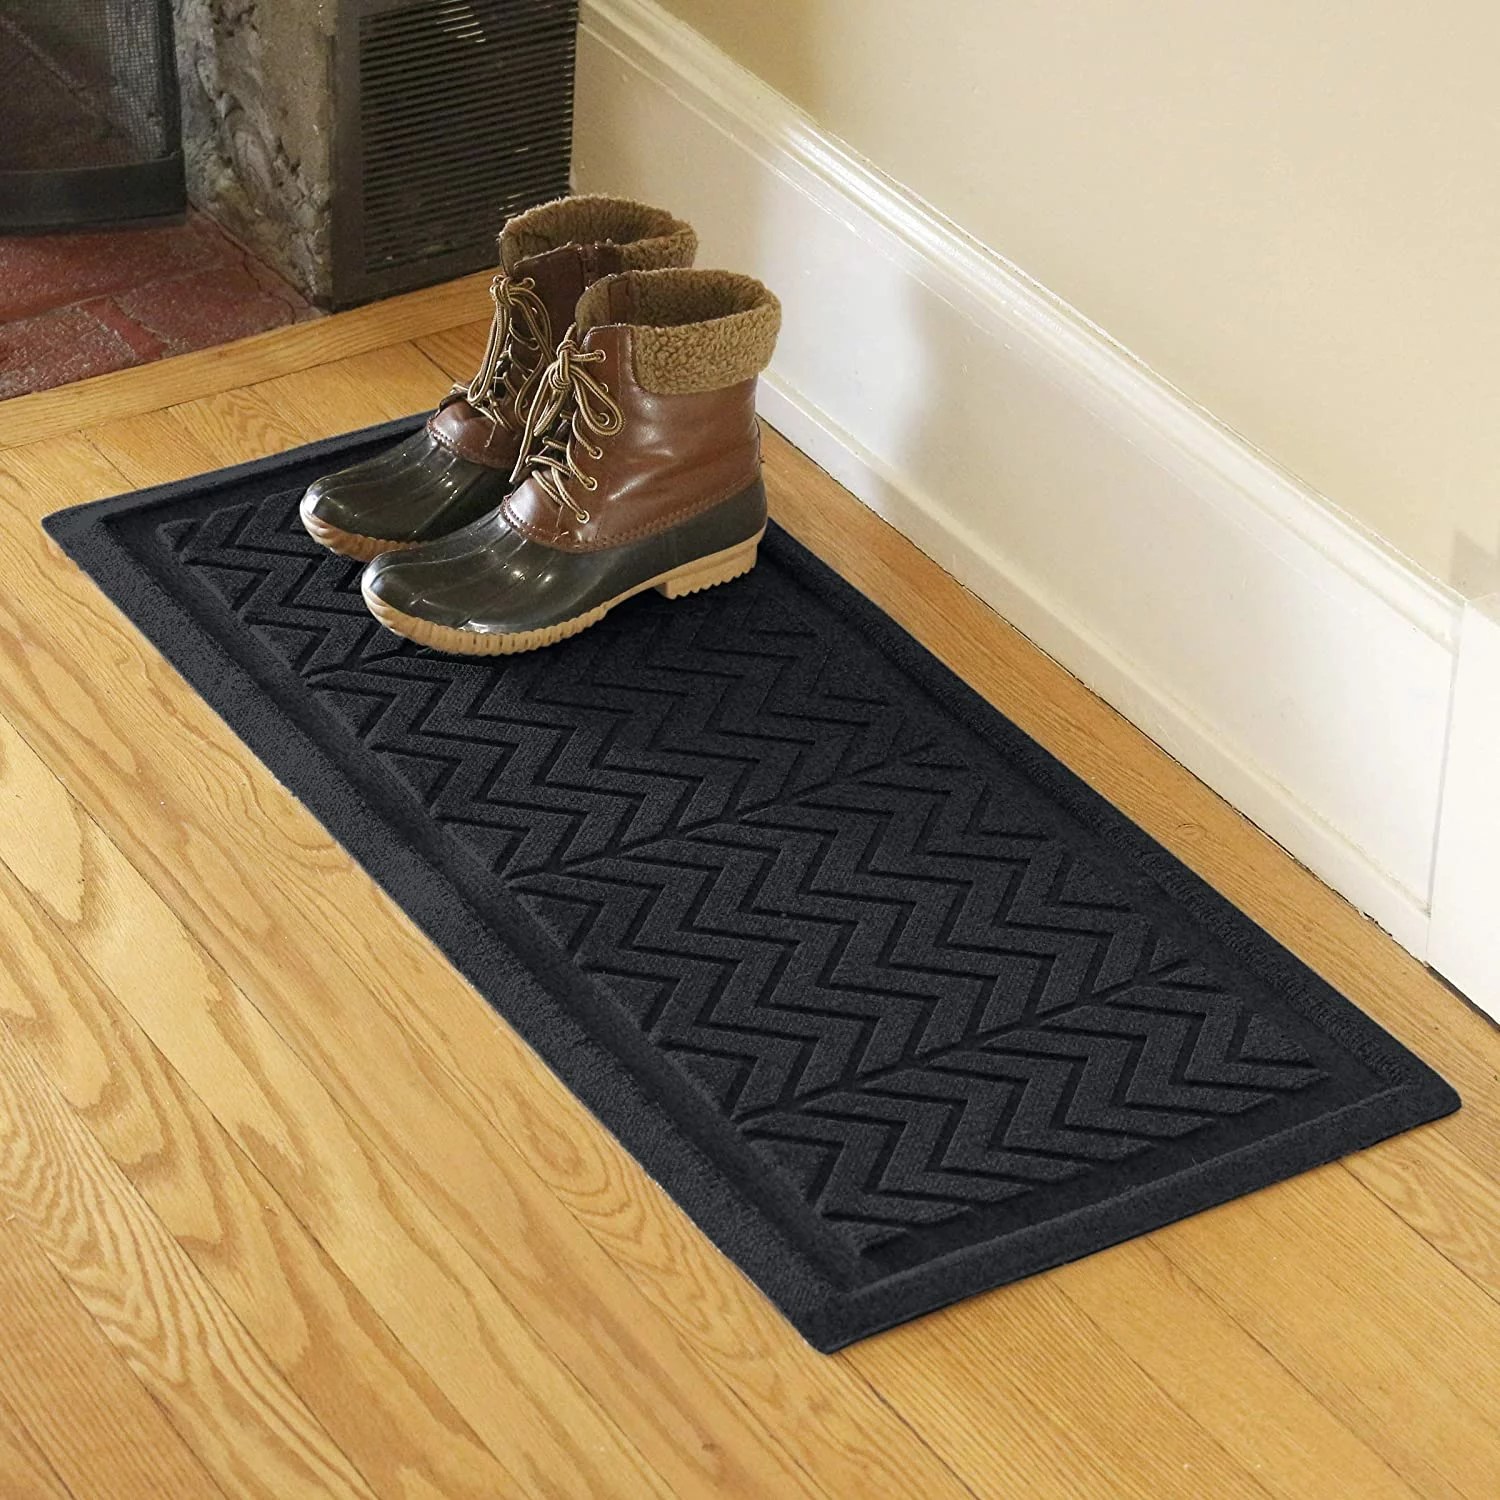 Upgrade Your Mudroom: Best Boot Trays and Rugs